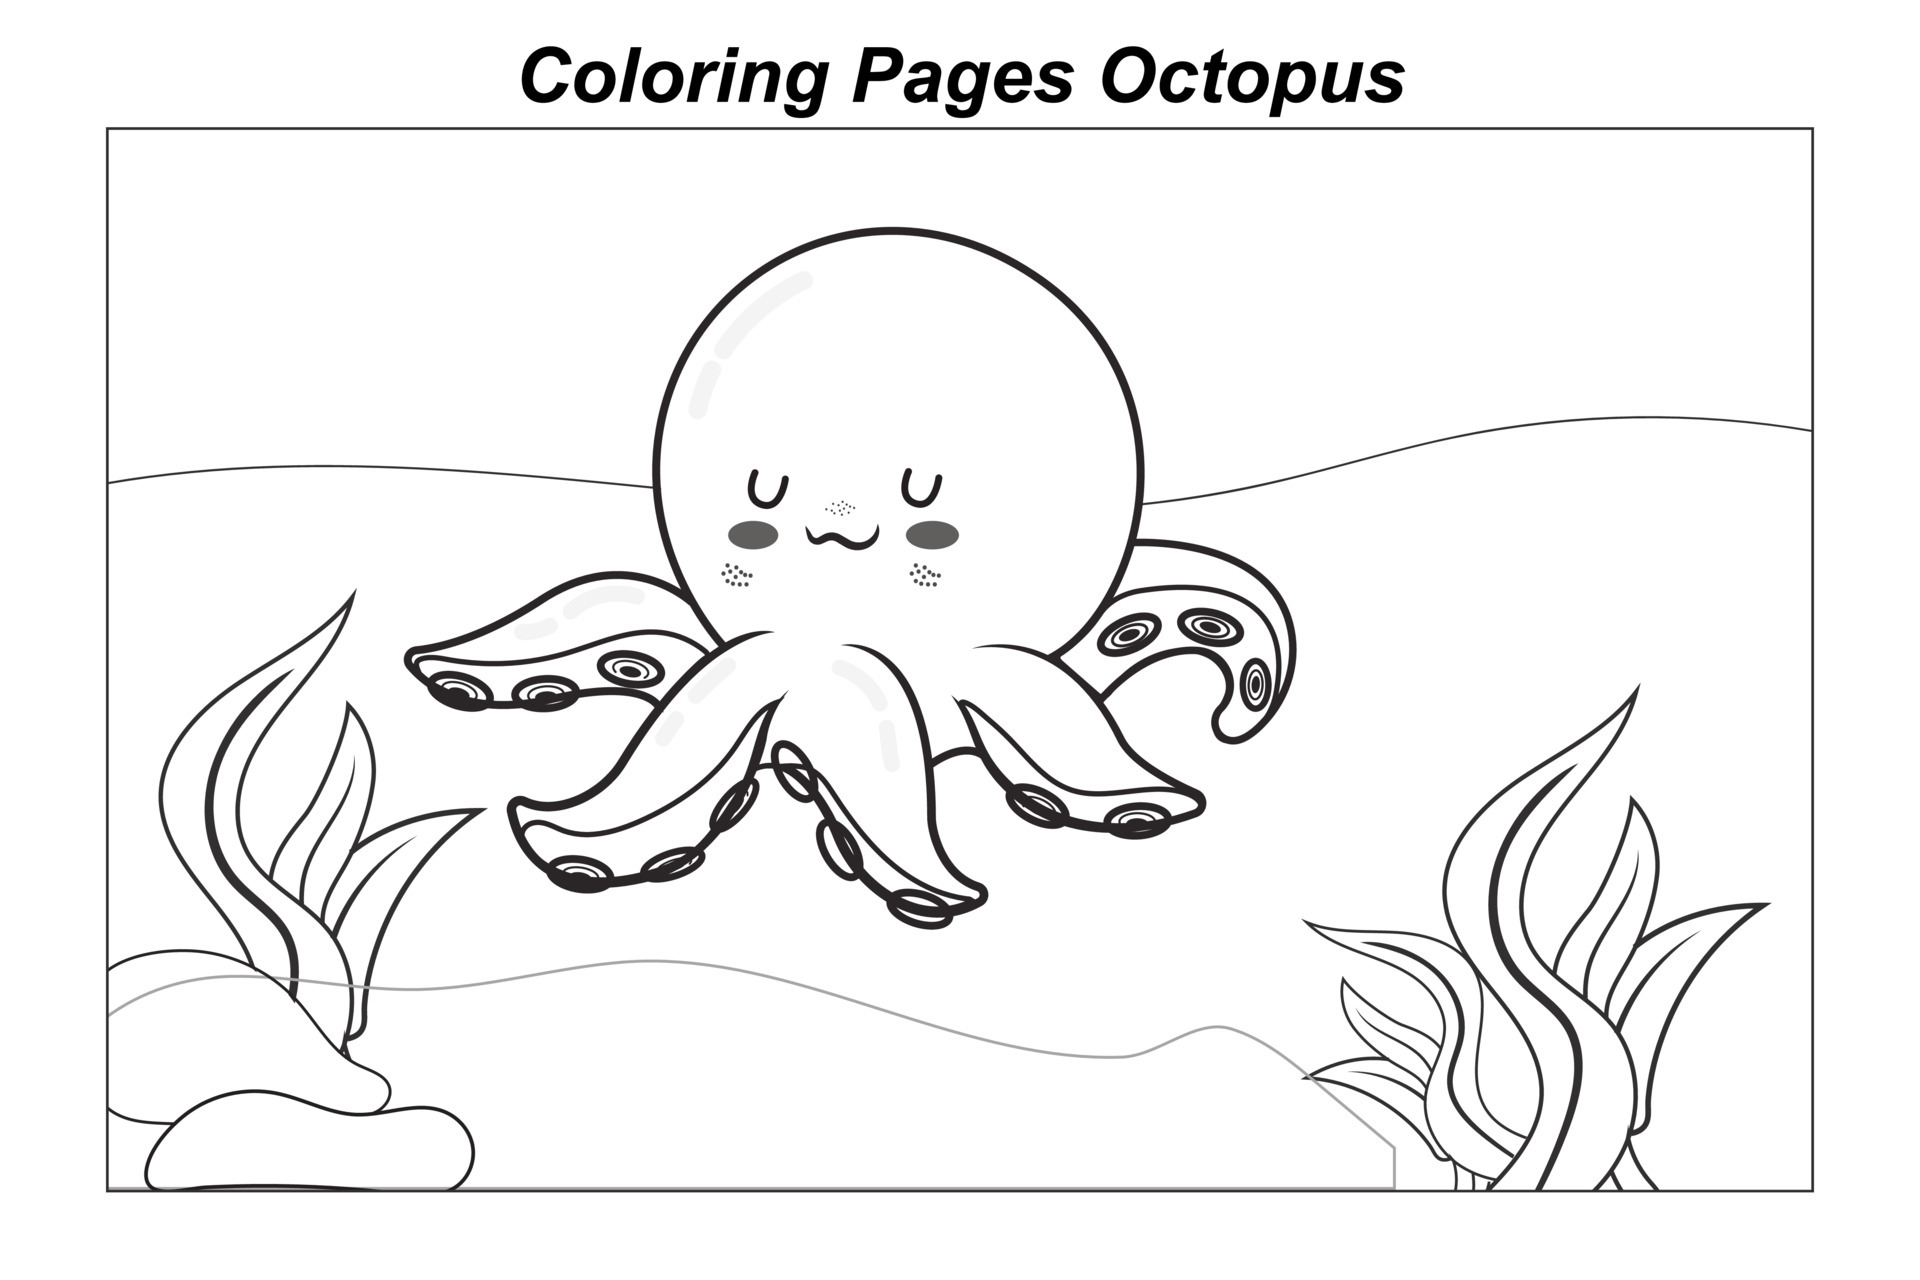 Coloring pages. Marine wild animals. little cute baby octopus ...